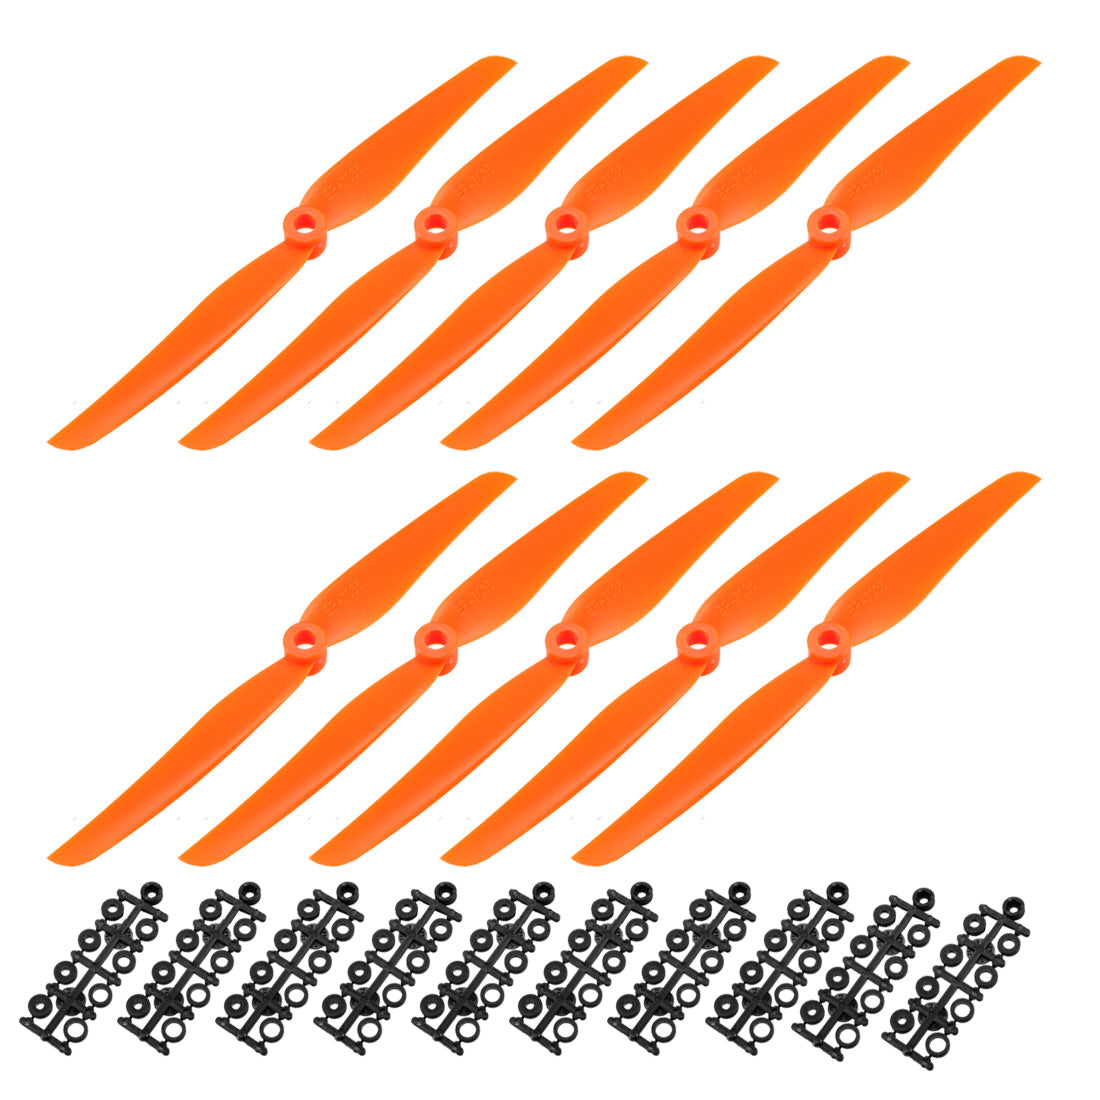 uxcell Uxcell RC Propellers  7035 7x3.5 Inch 2-Vane Fixed-Wing for Airplane Toy, Nylon Orange 10 pcs with Adapter Rings